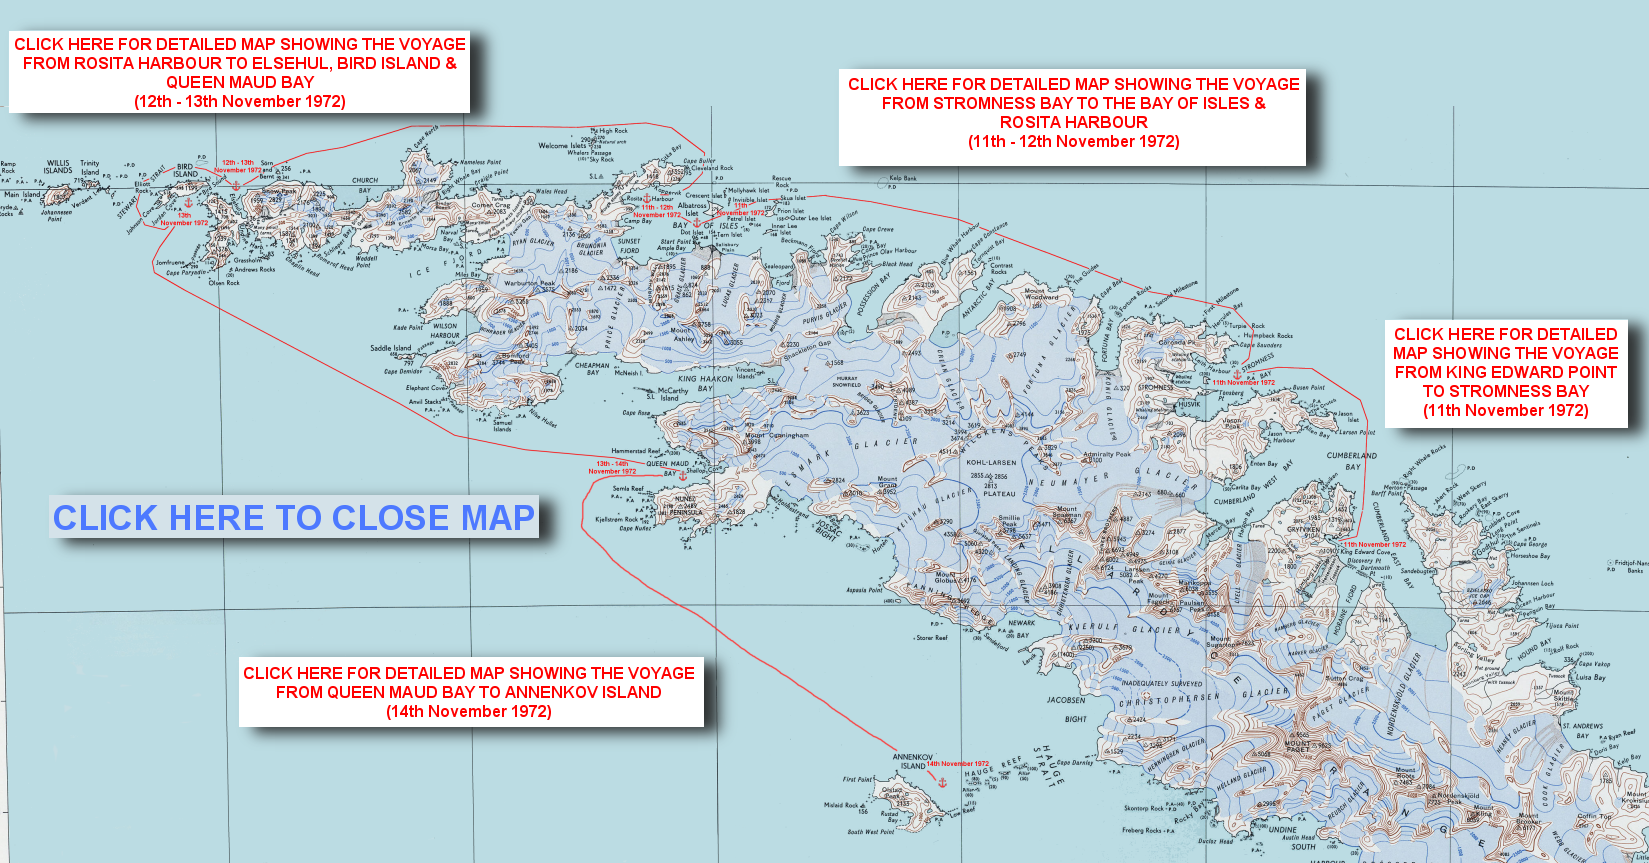 Map of South Georgia. - click red text areas for larger scale maps showing the track of RRS John Biscoe 11th - 14th Nov 1972.